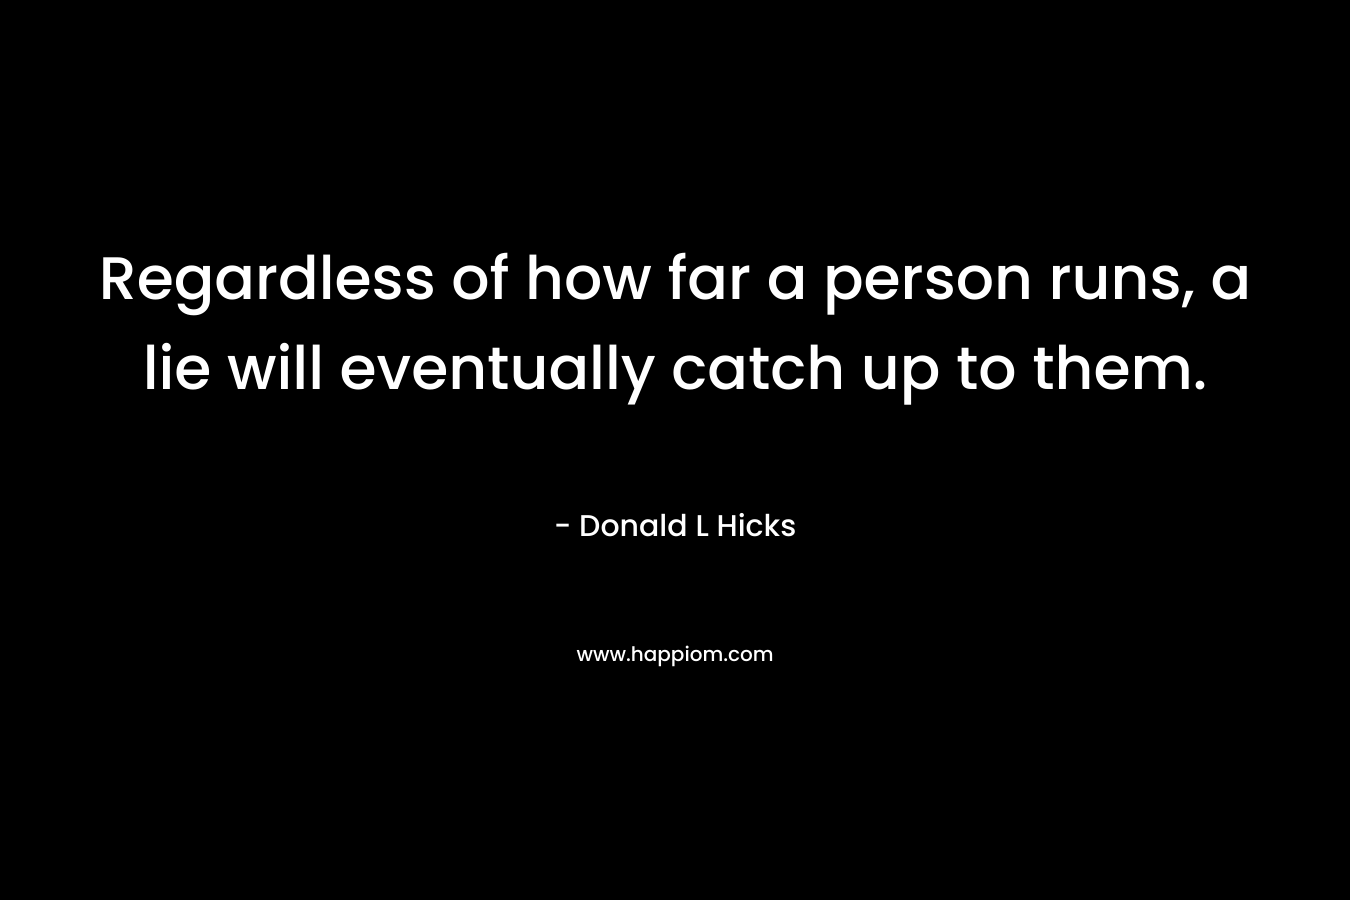 Regardless of how far a person runs, a lie will eventually catch up to them.